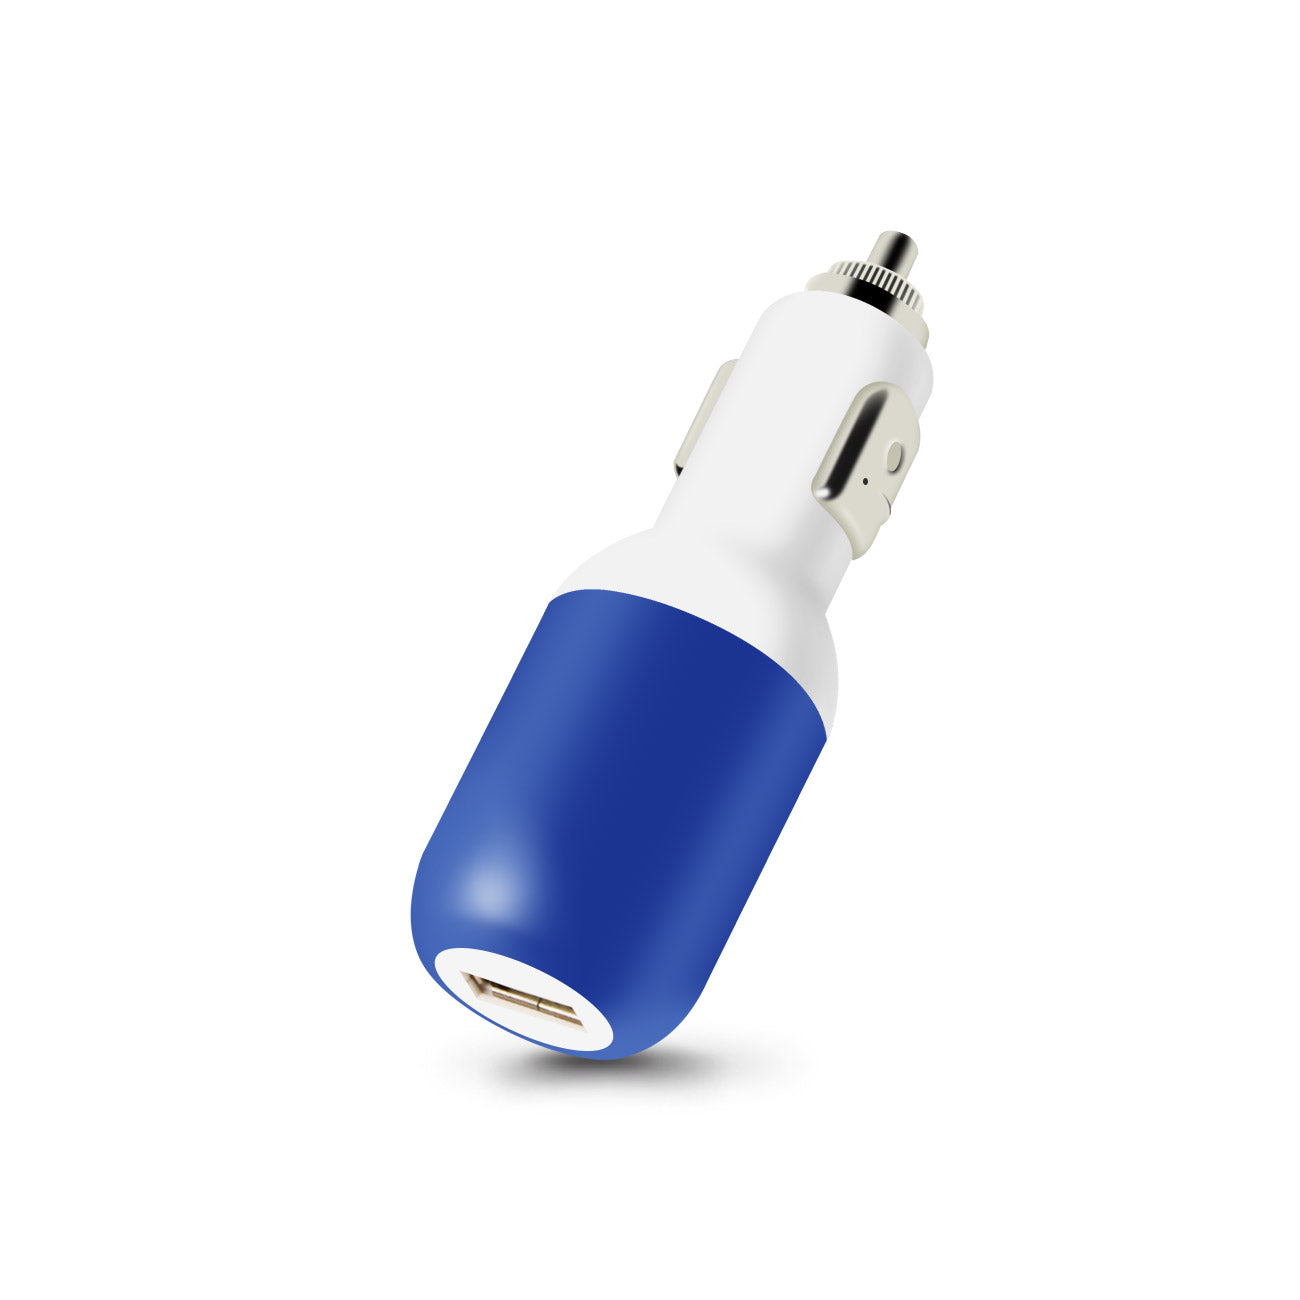 APPLE IPHONE 3G/3GS USB CAR CHARGER BLUE